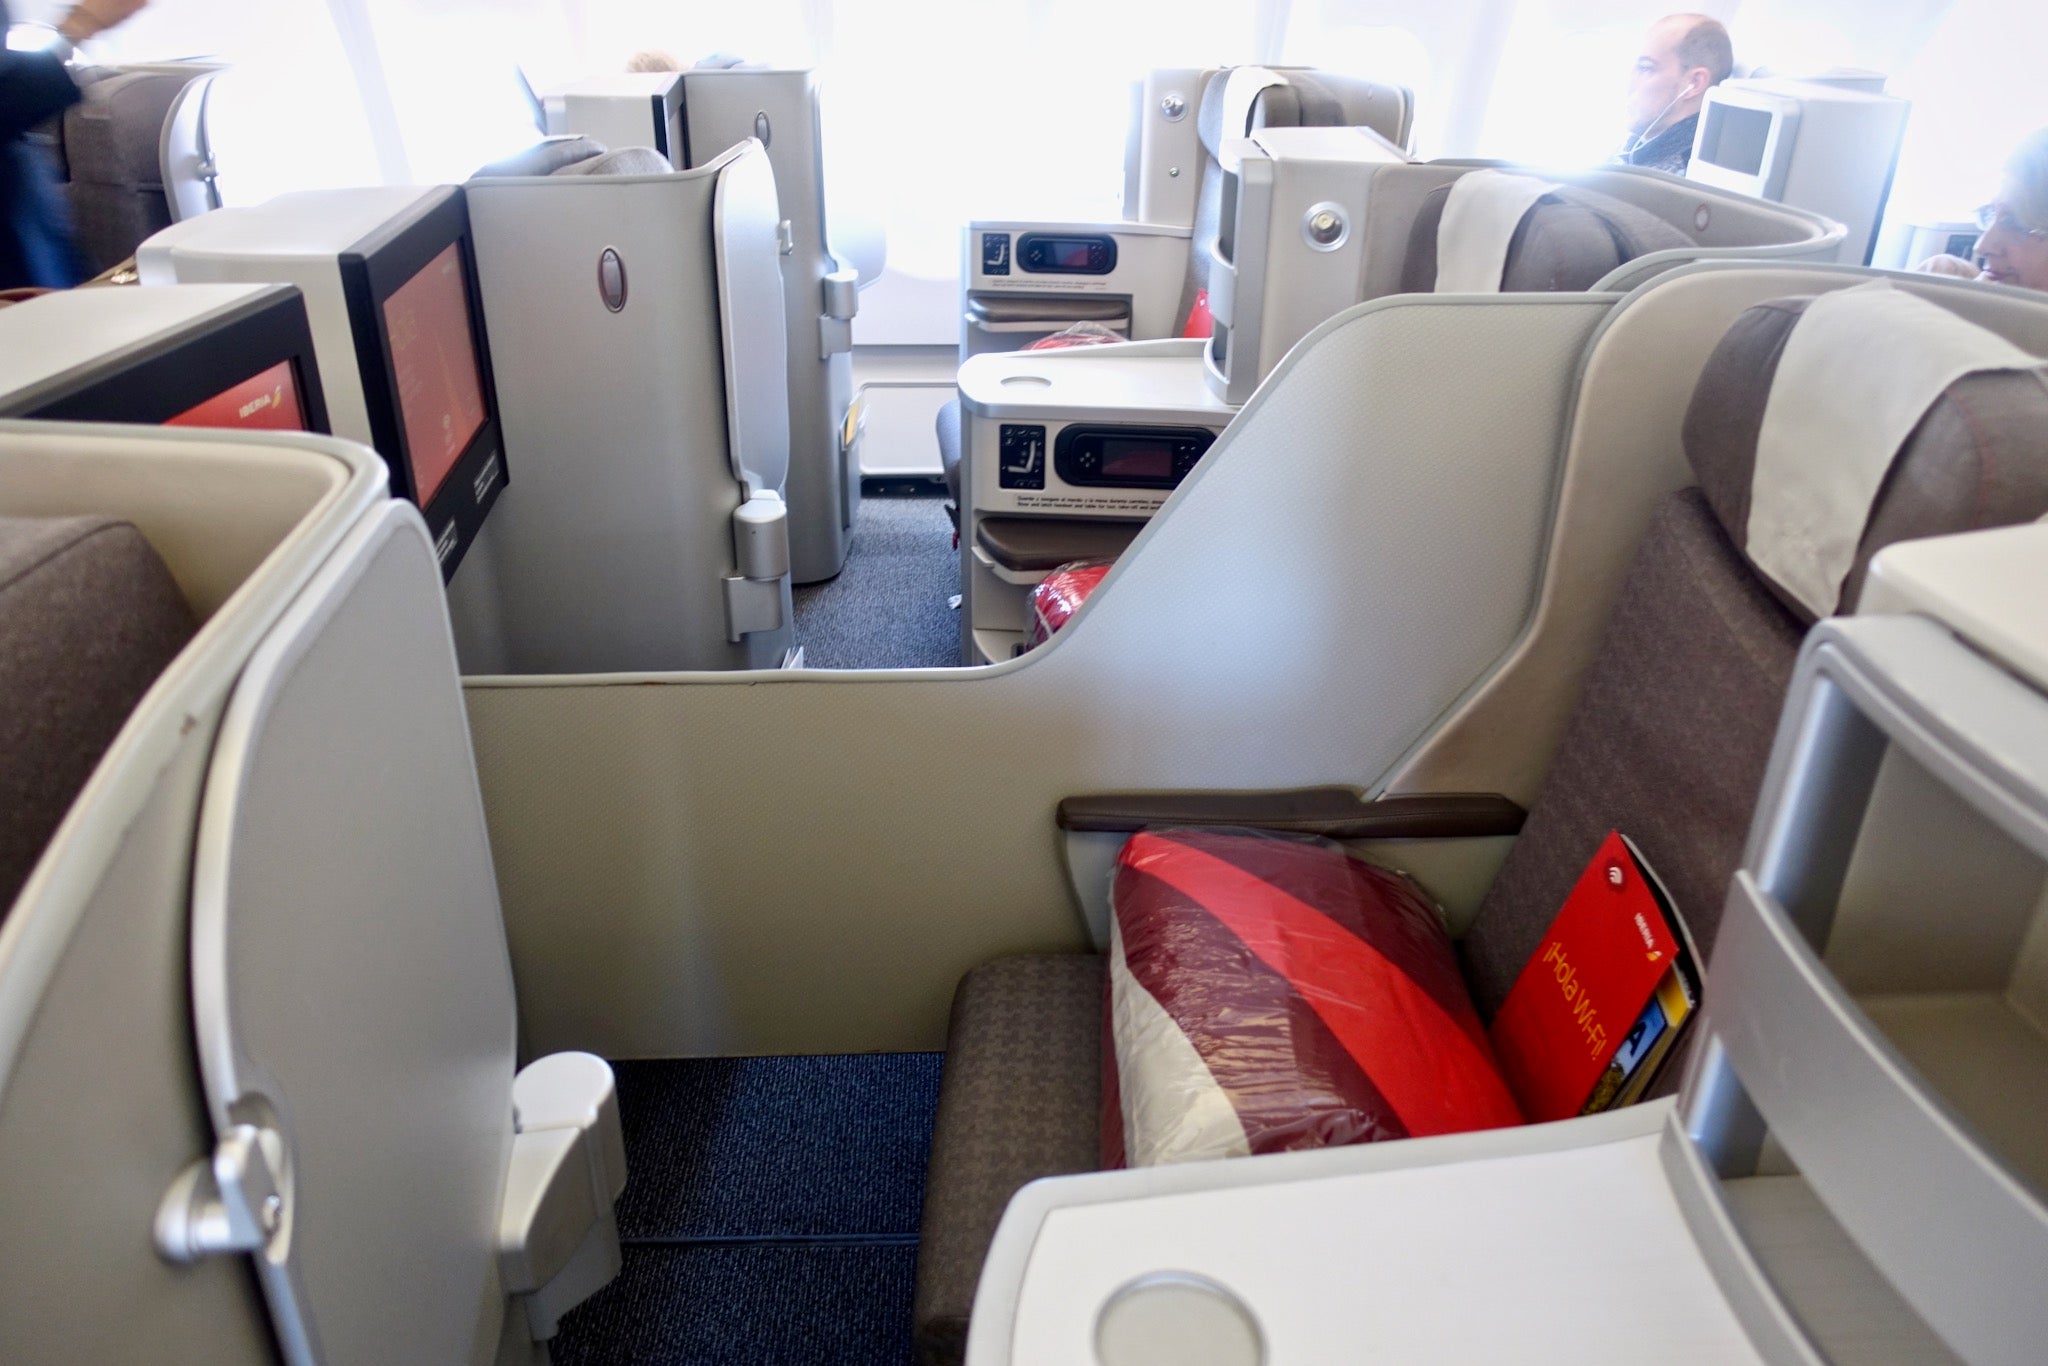 8. Business Class Features and Reasonable Pricing